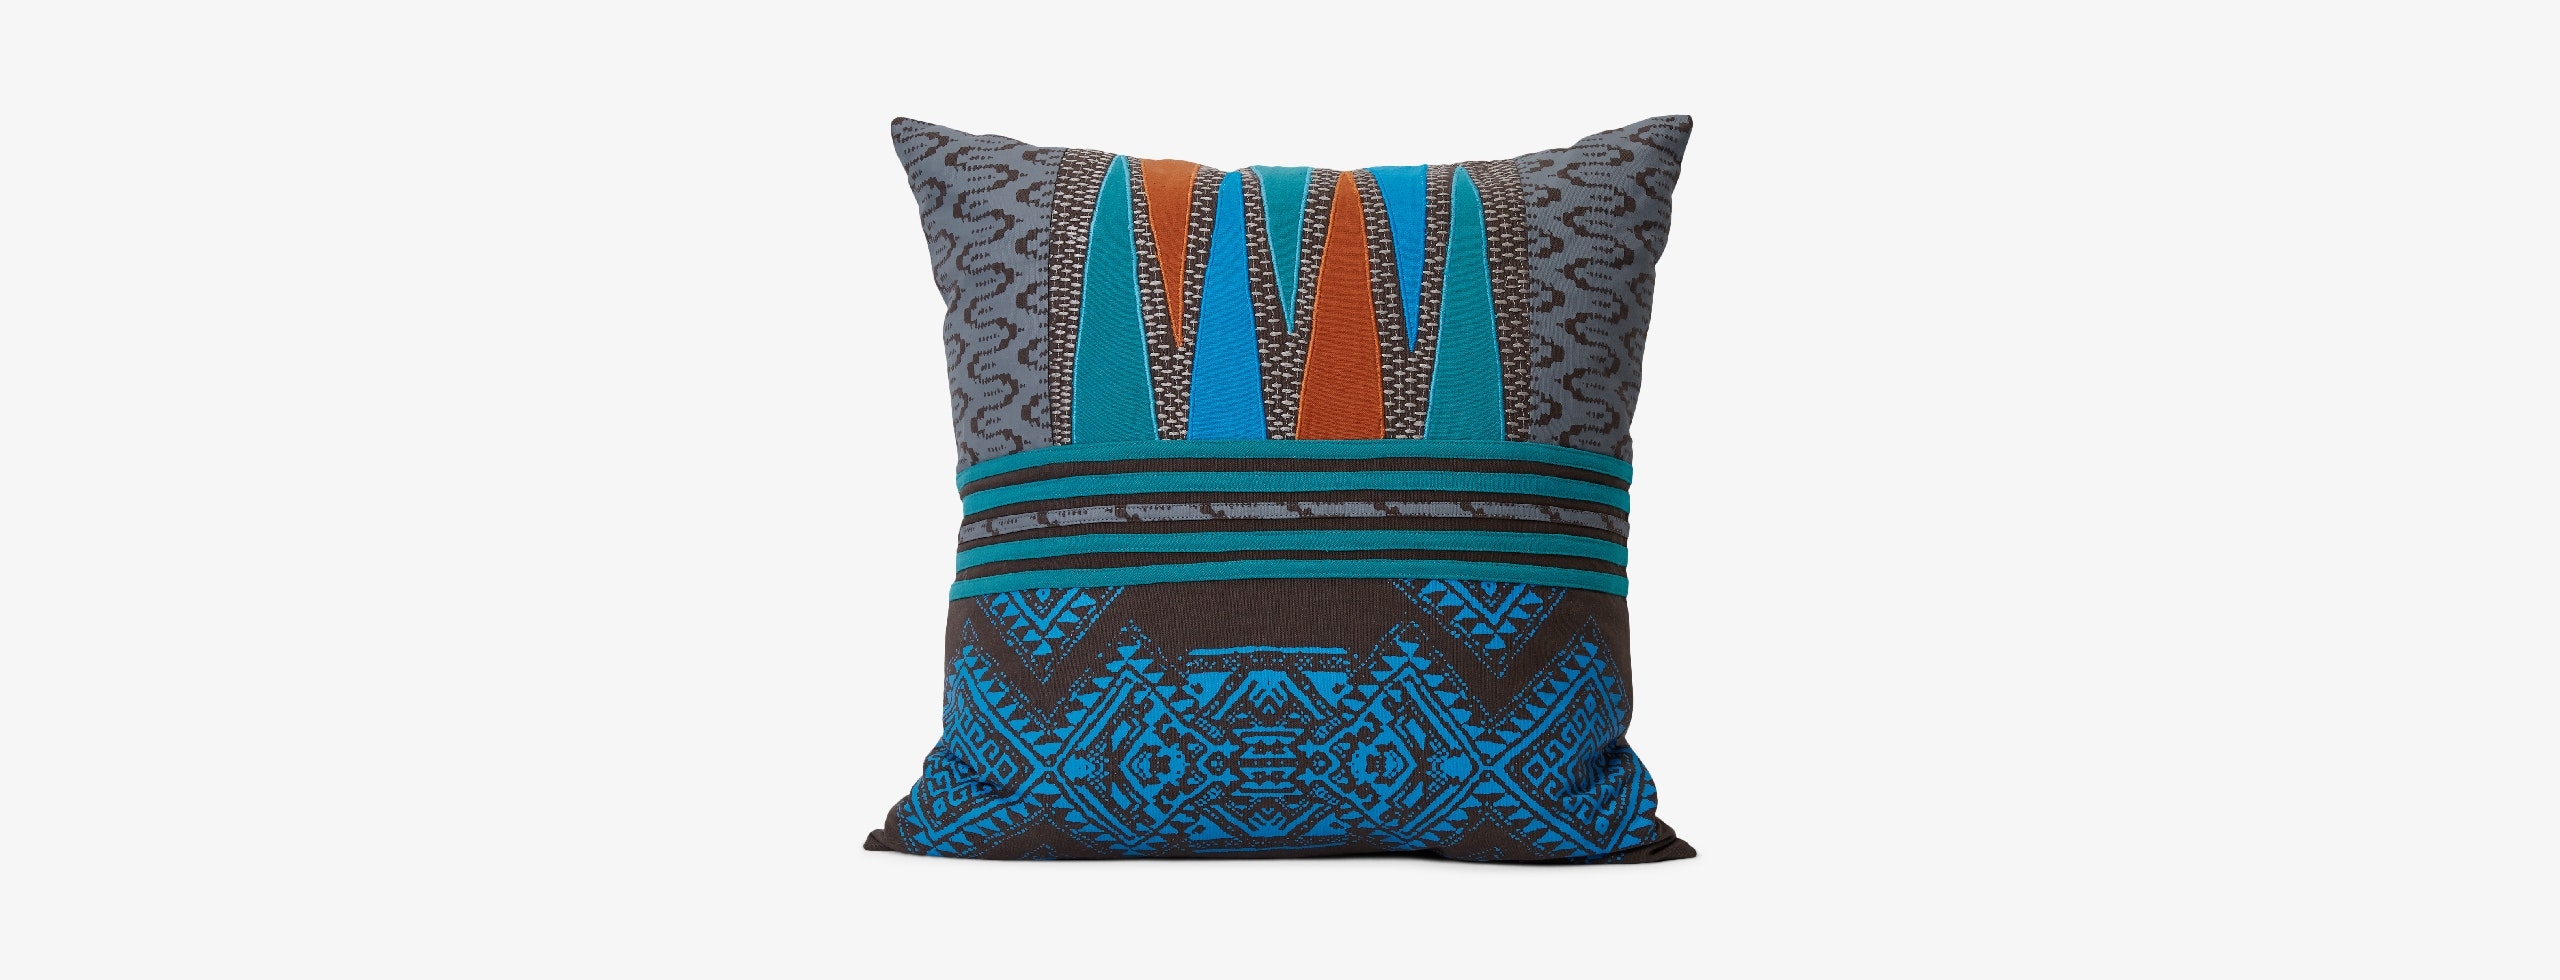 Victoria (Teal) Pillow - Image 0